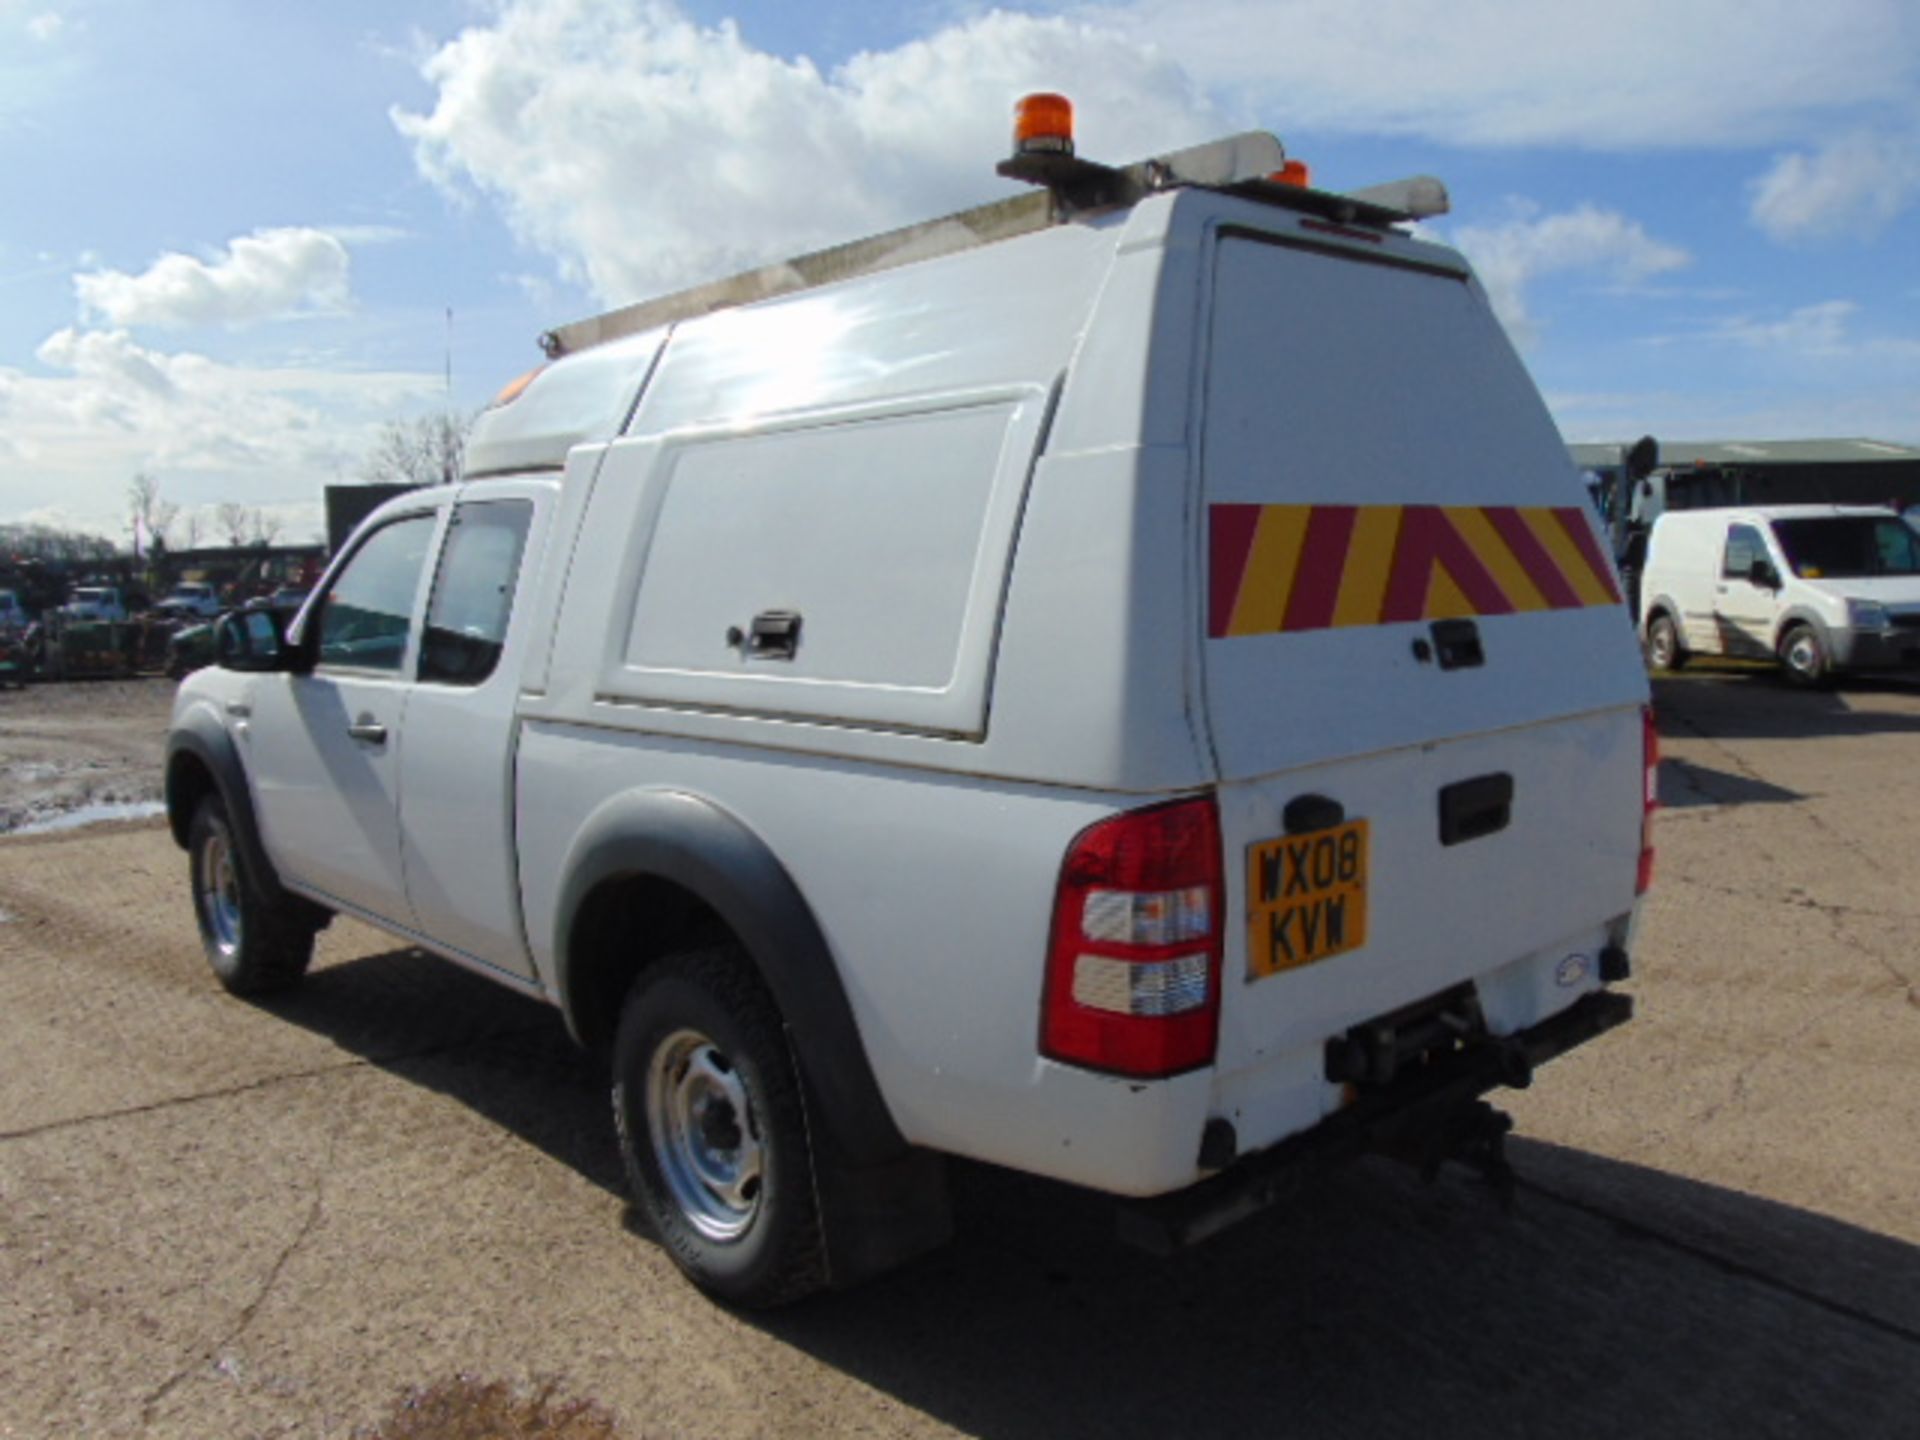 2008 Ford Ranger Super Cab 2.5TDCi 4x4 Pick Up C/W Toolbox Back and Winch - Image 8 of 21